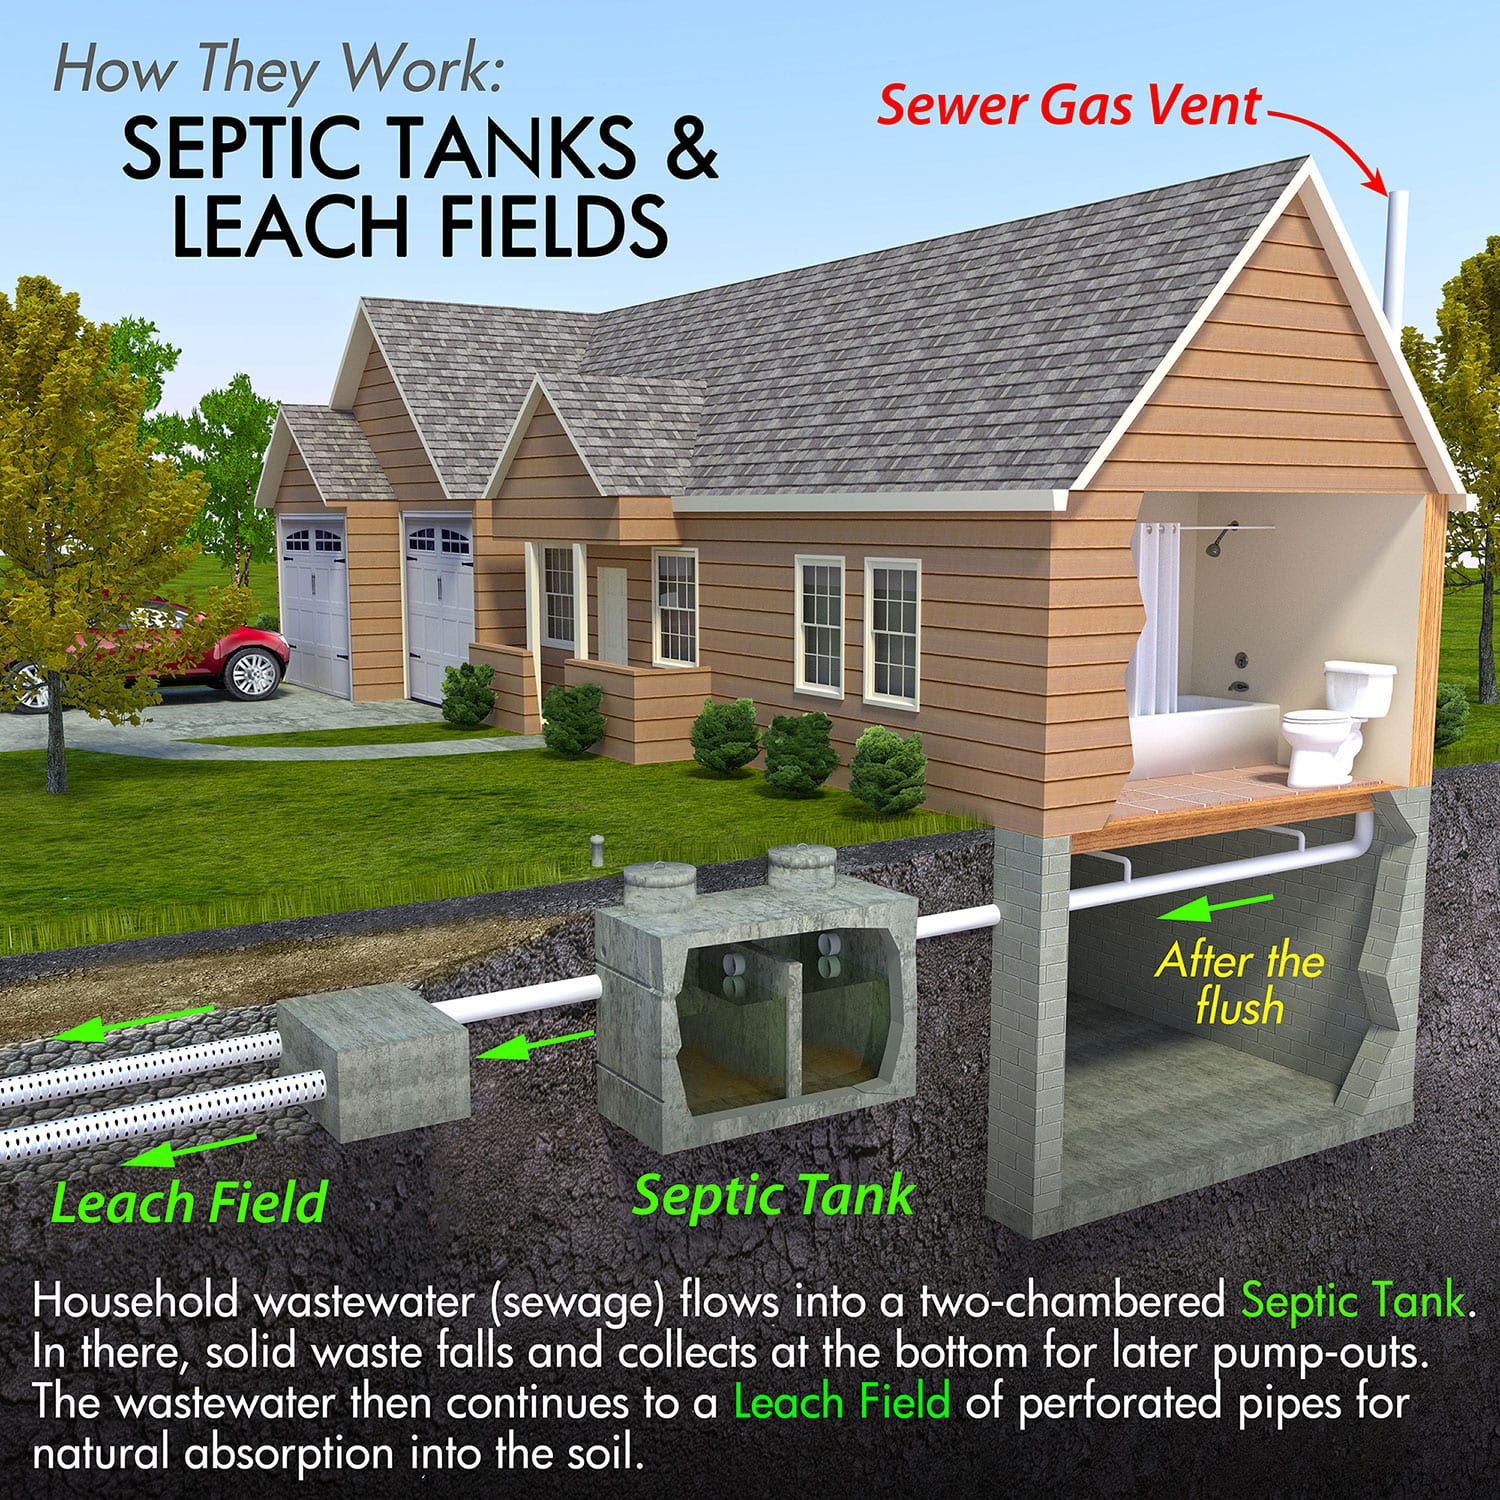 septic tanks and leach fields